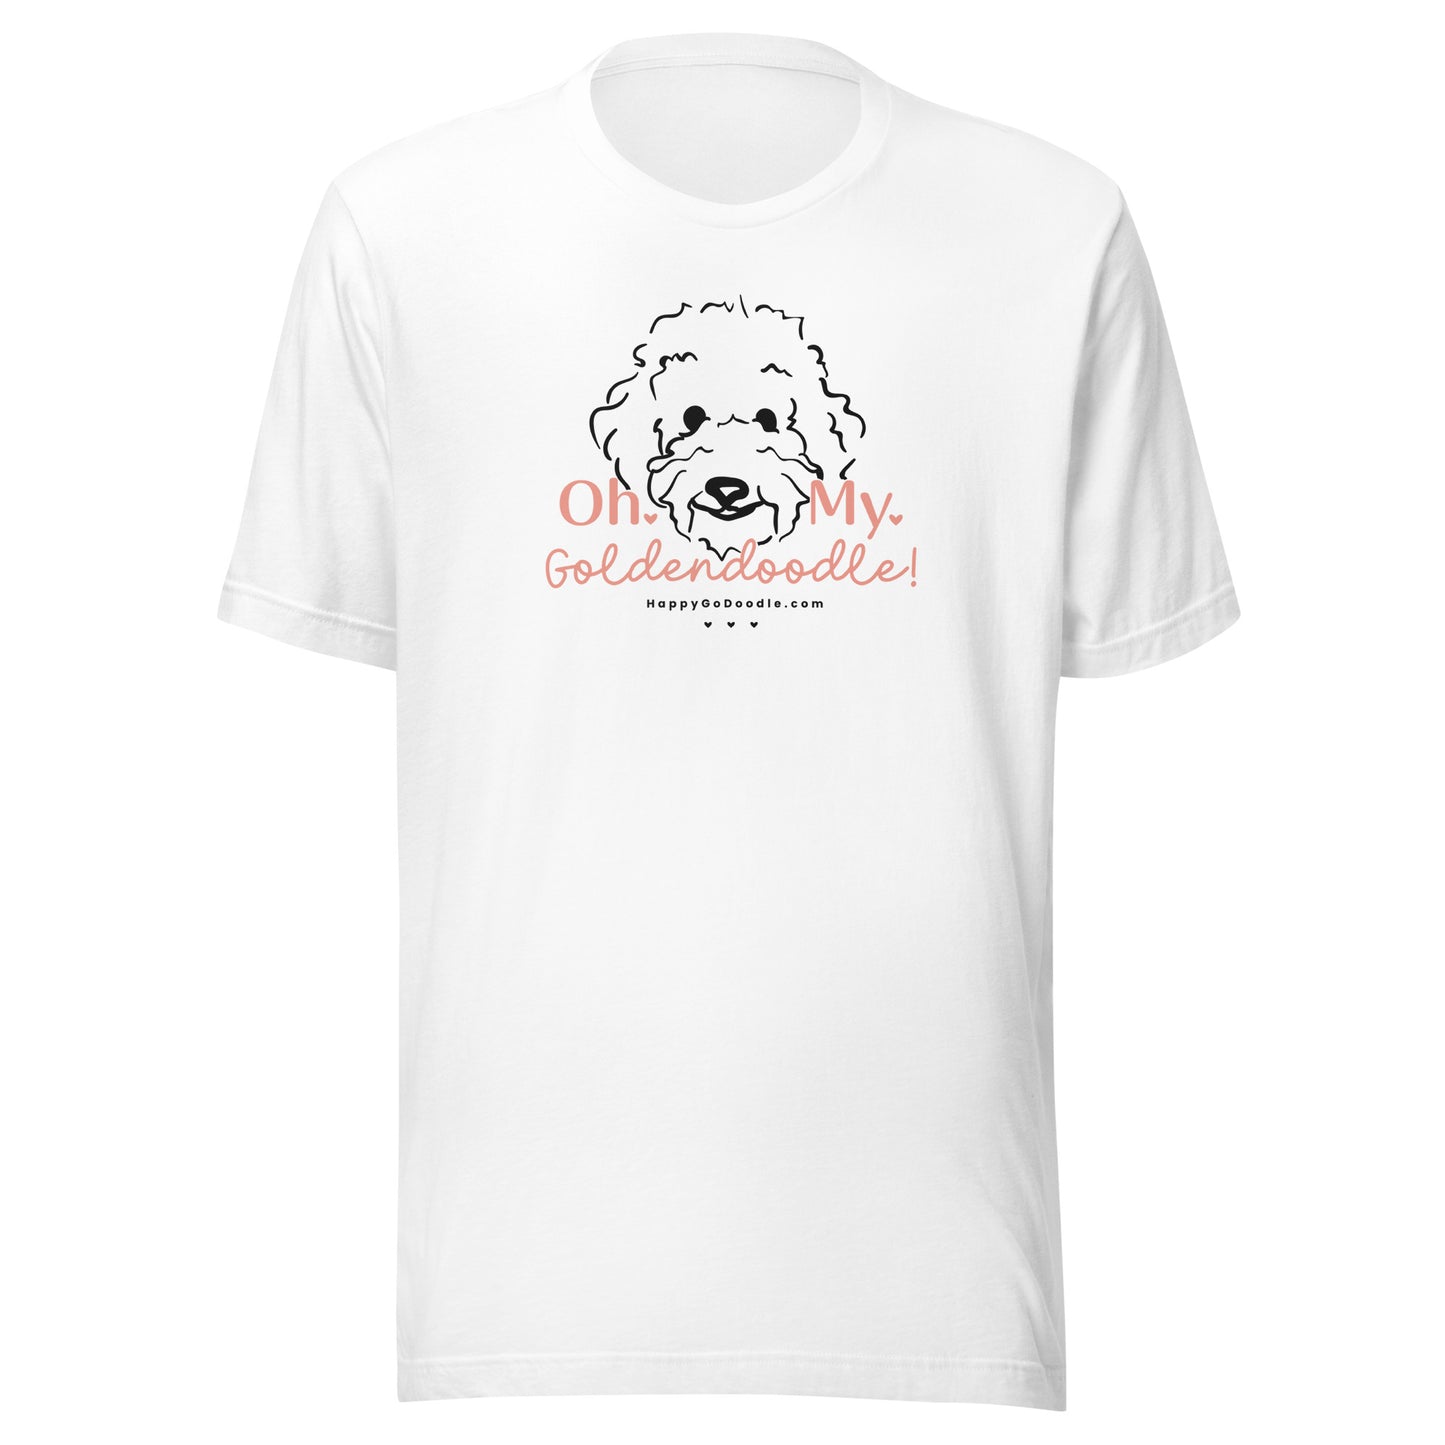 Goldendoodle t-shirt with Goldendoodle dog face and words "Oh My Goldendoodle" in white color